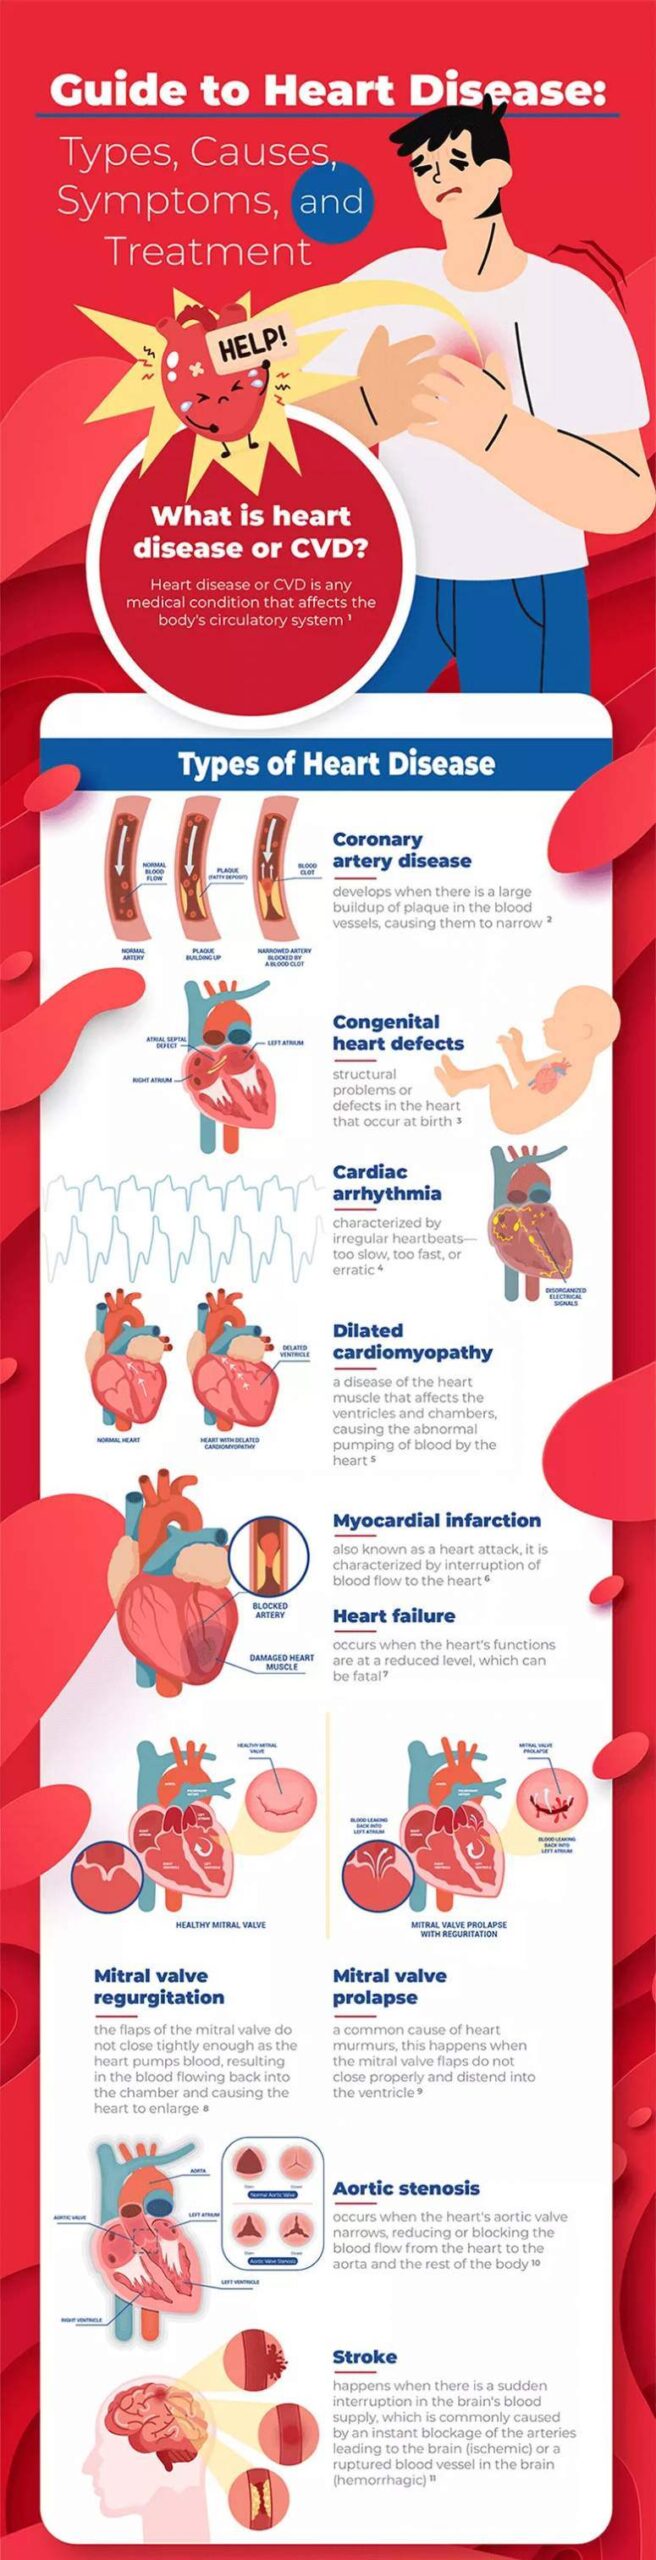 Guide-to-Heart-Disease